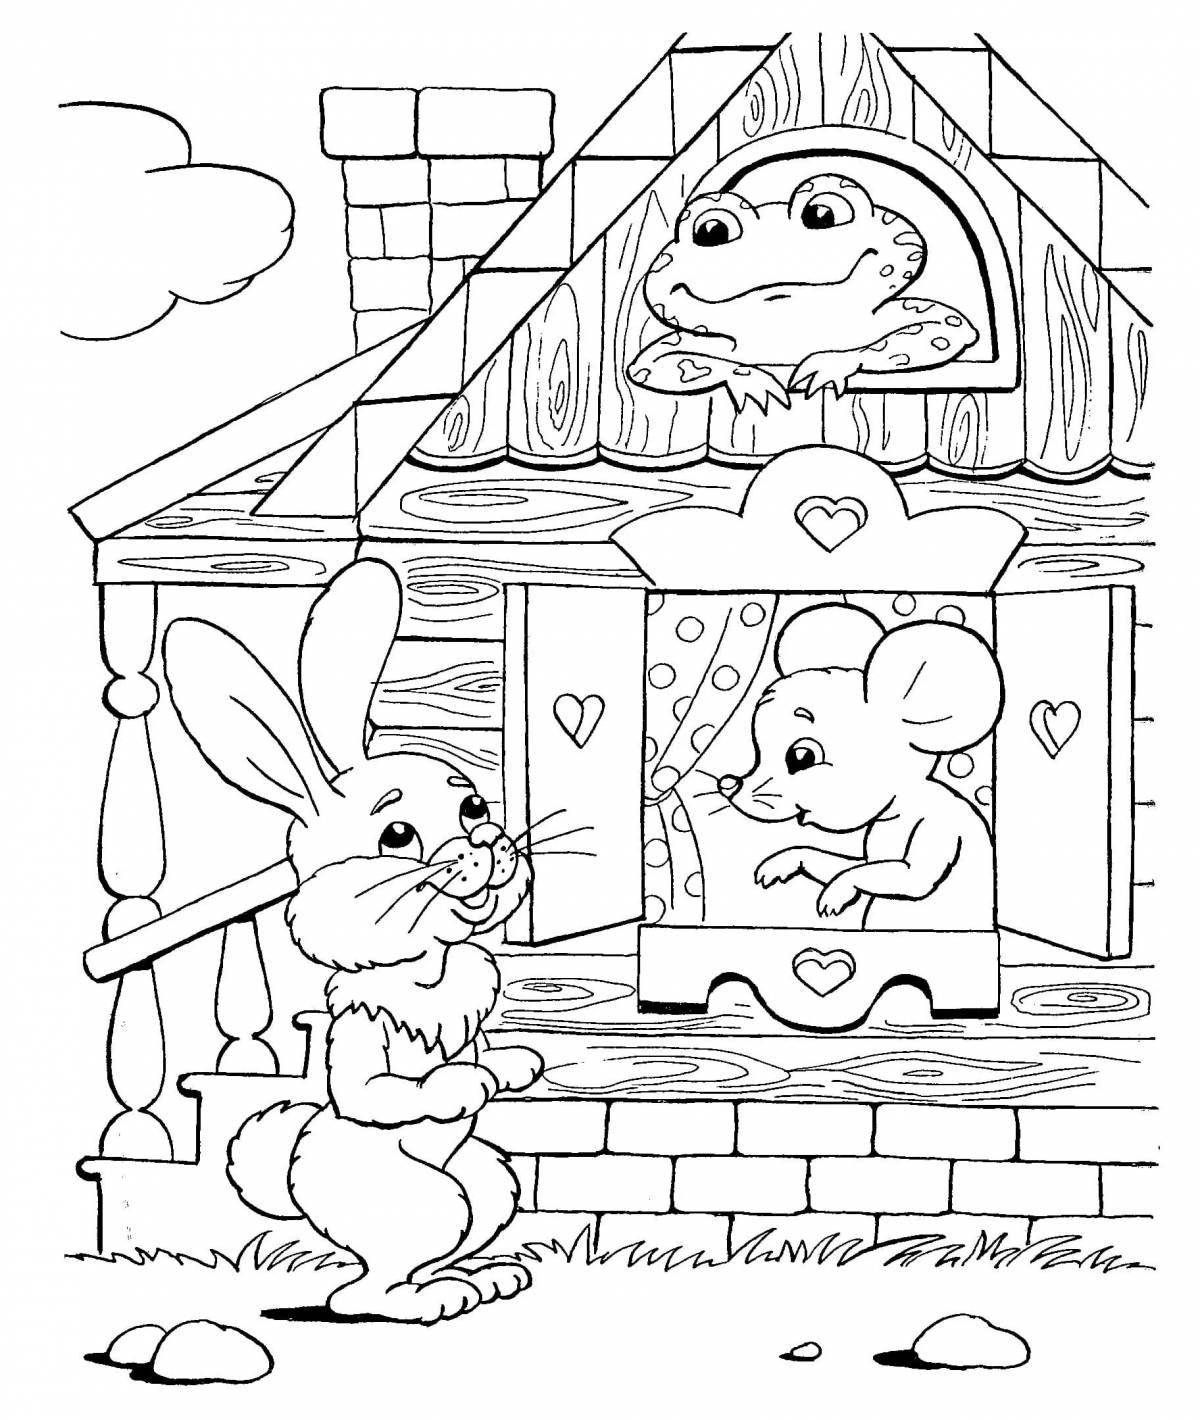 Incredible coloring book visiting a fairy tale 4-5 years old middle group